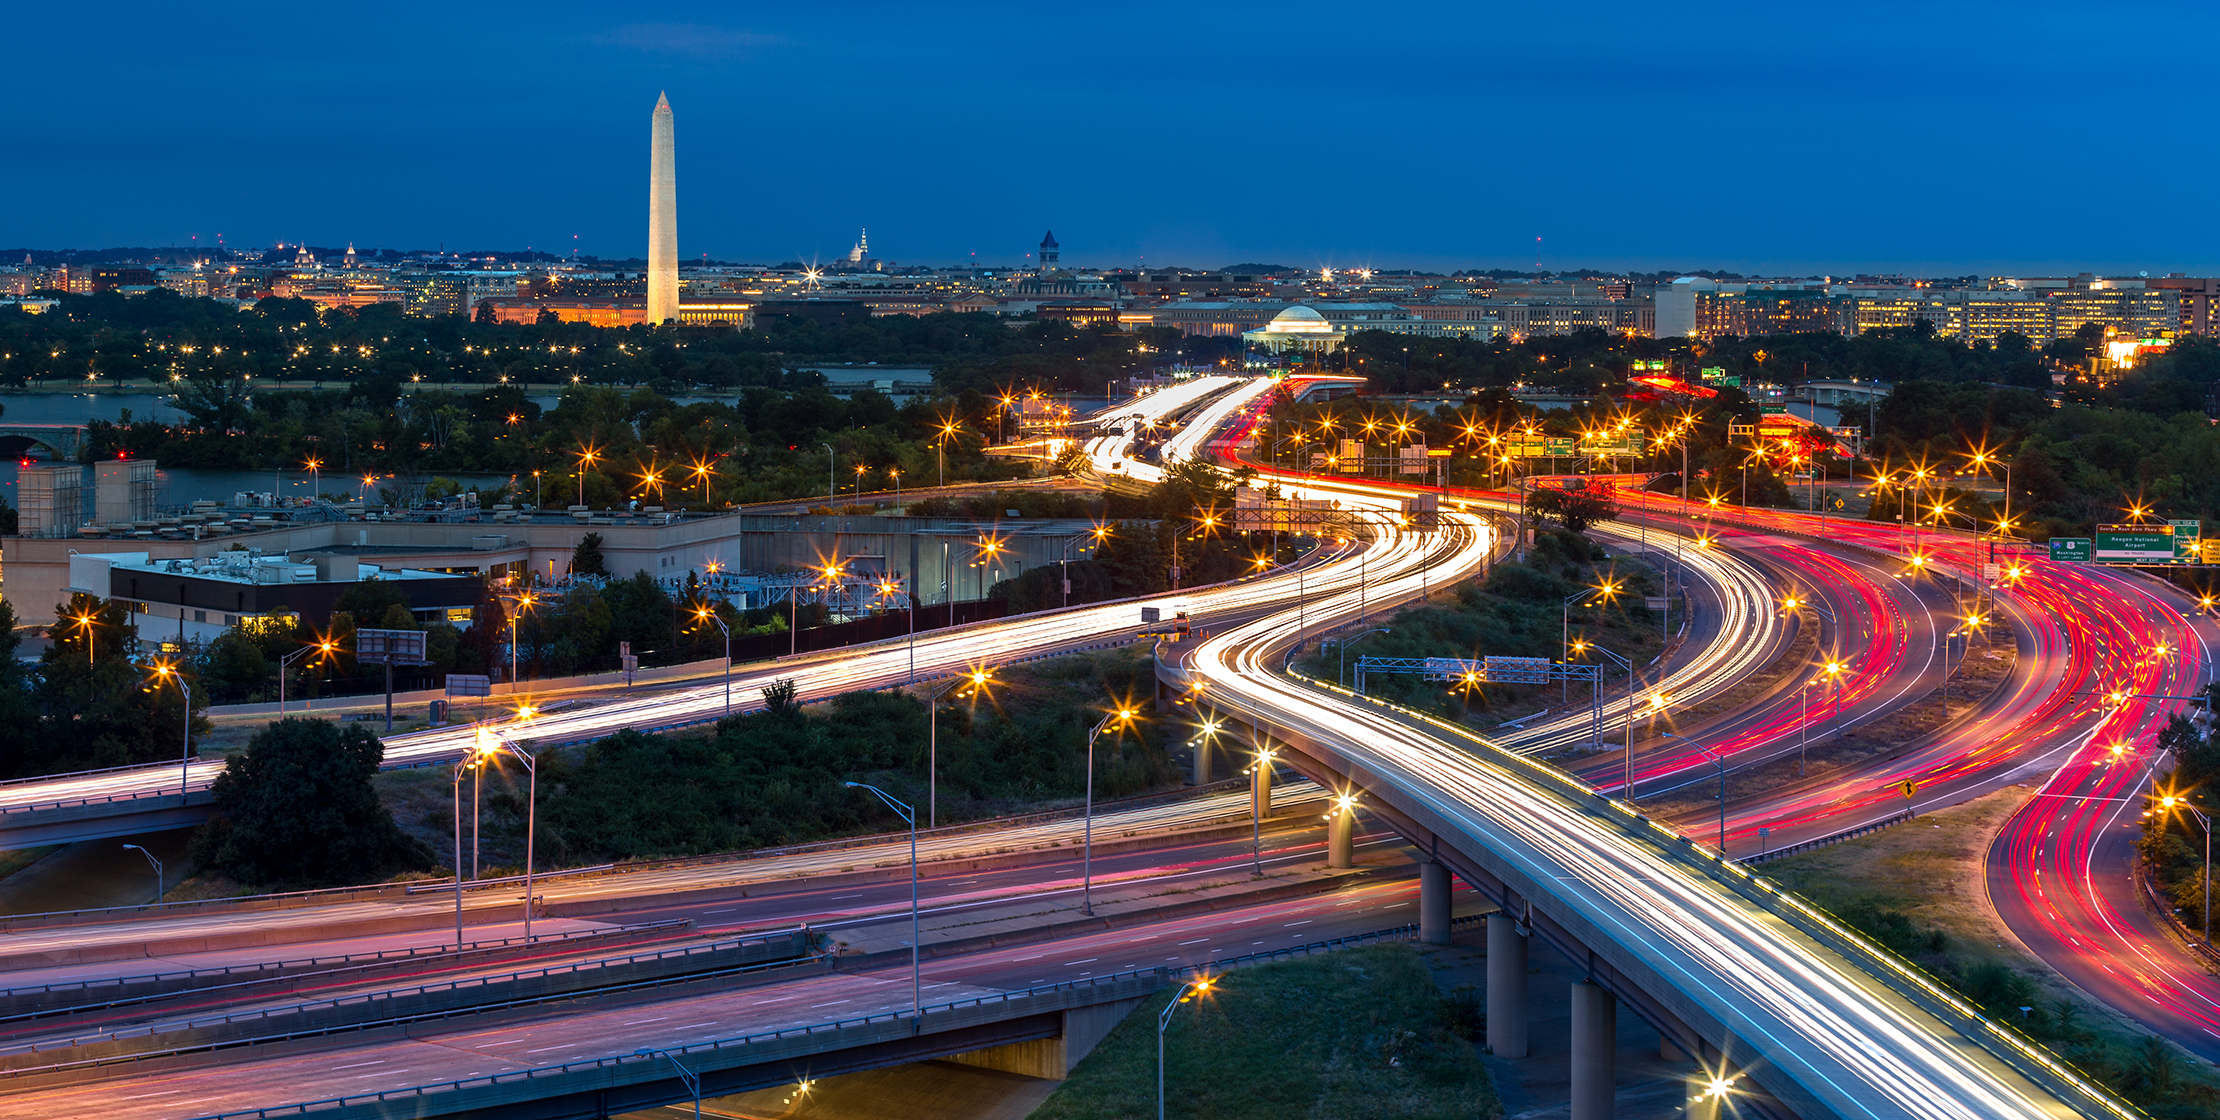 A view of highways at night, with the Washington Monument in the distance